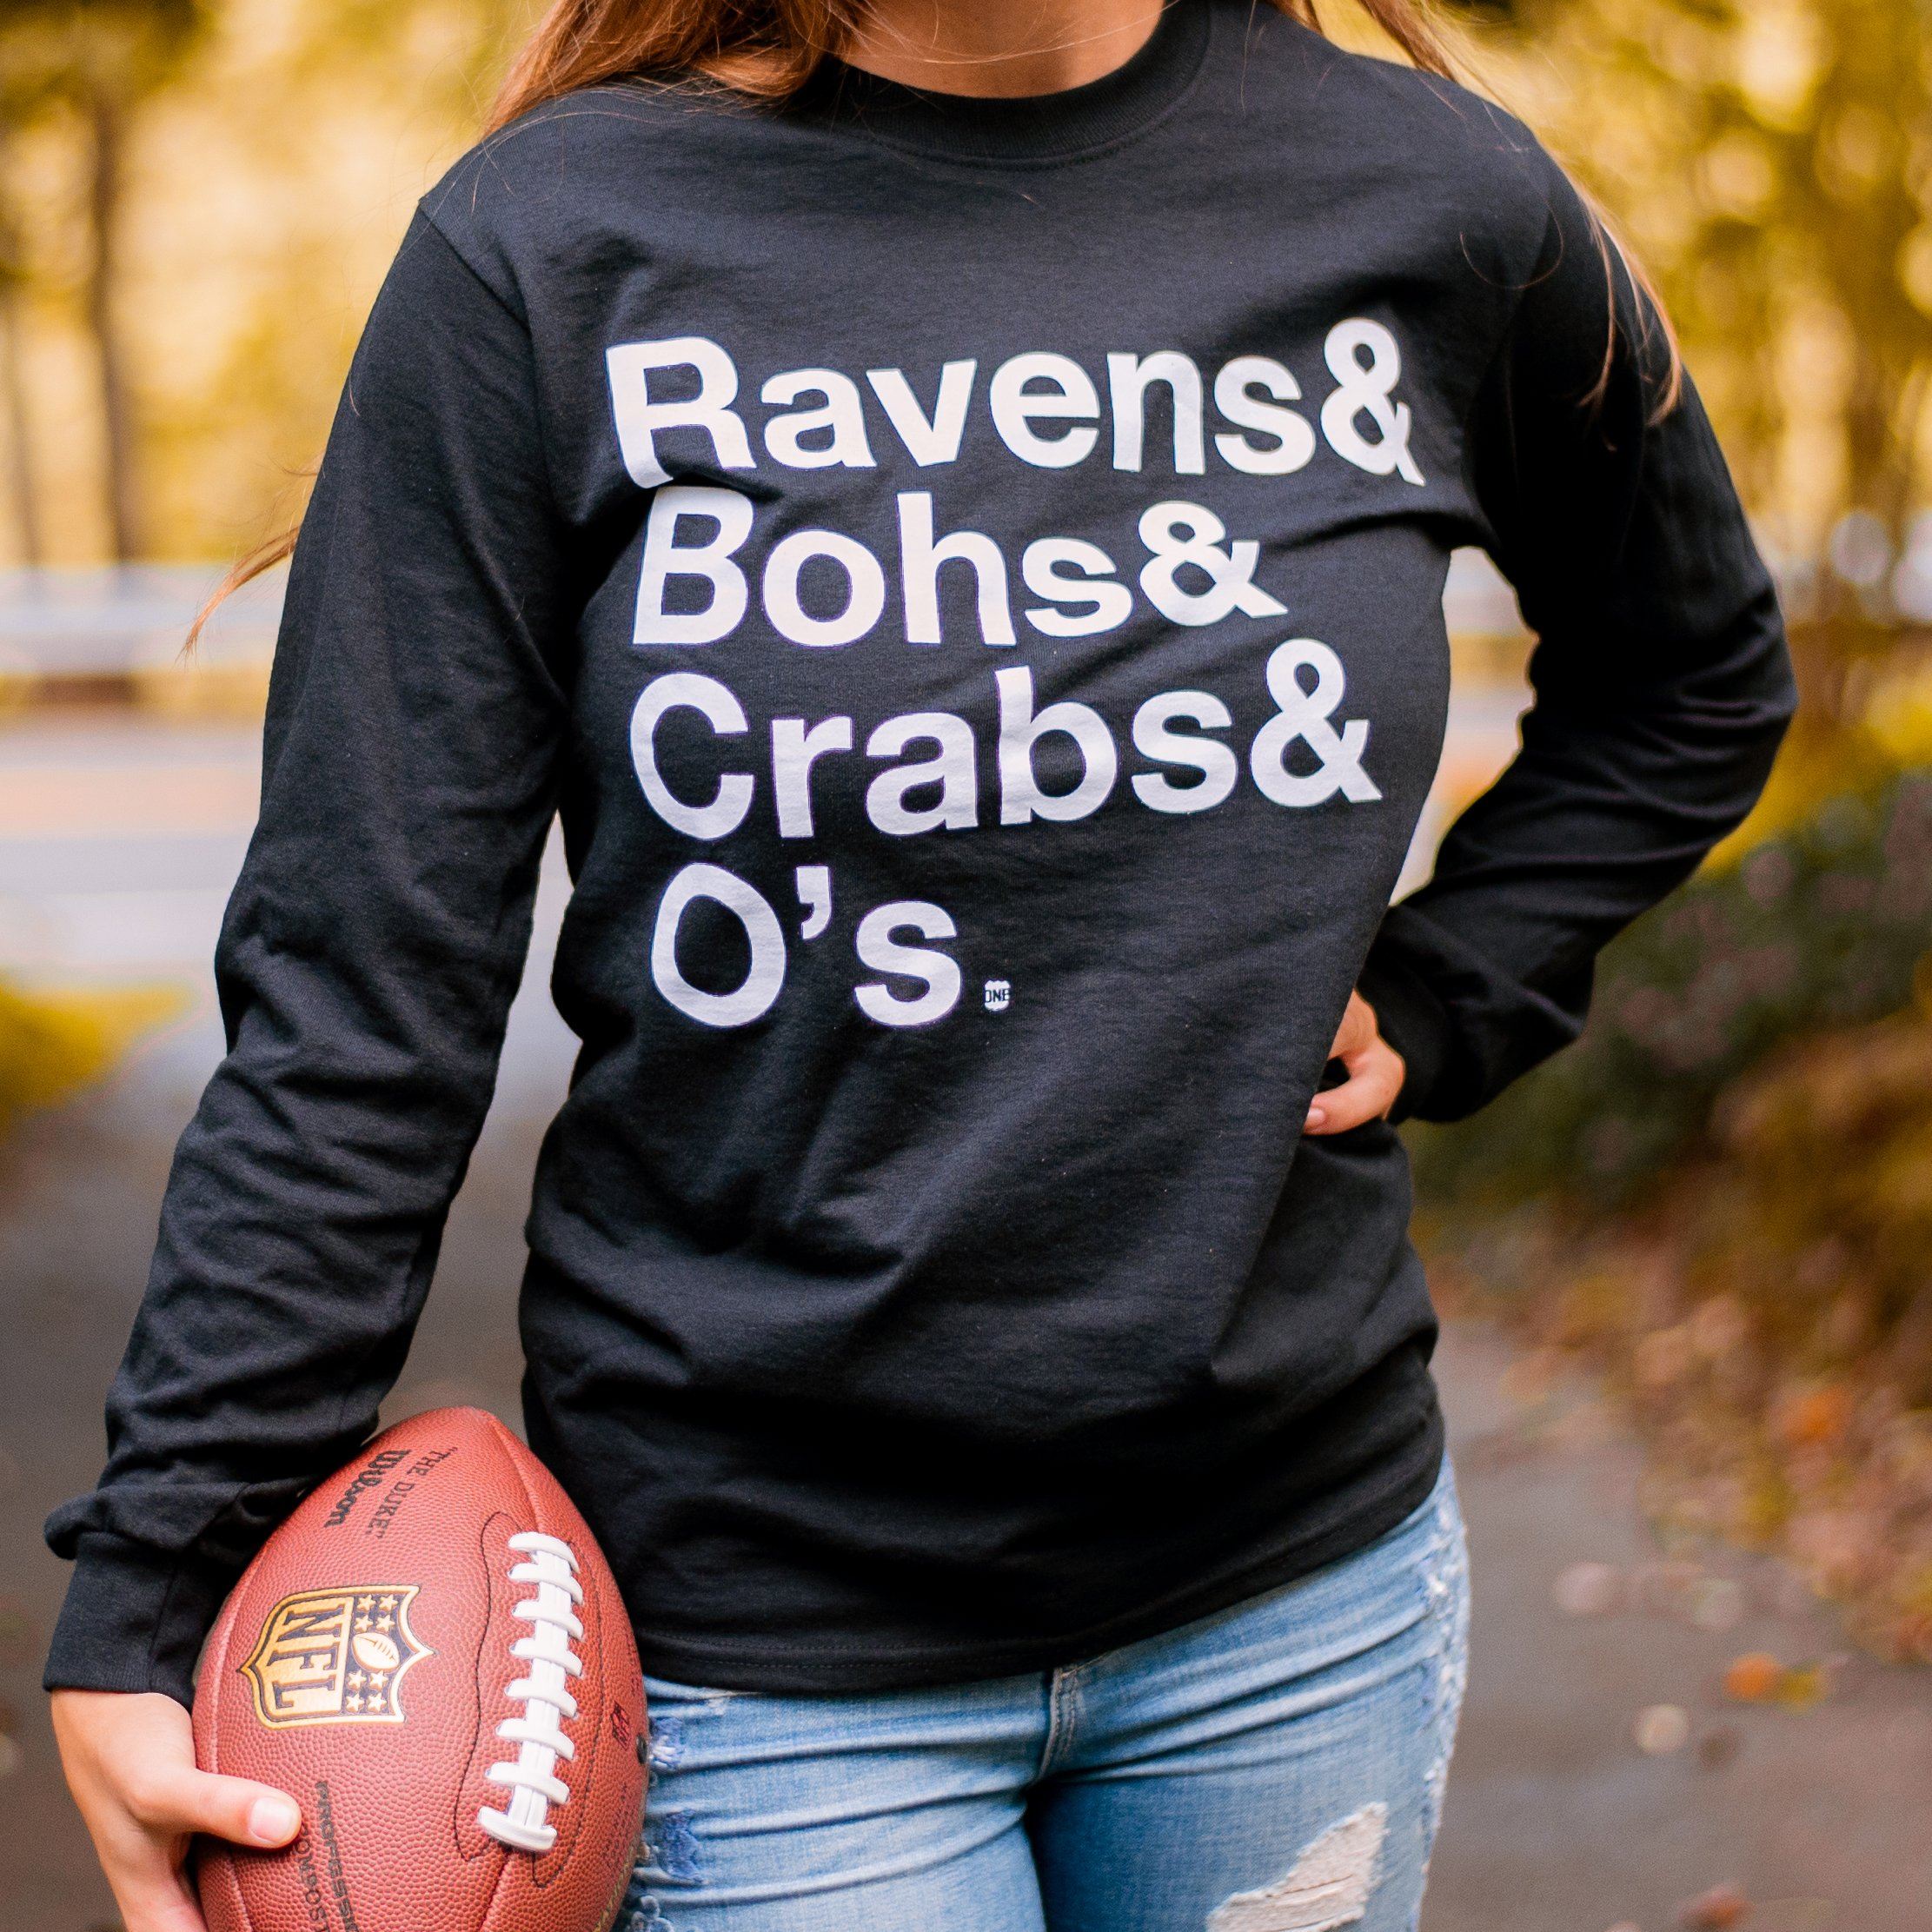 ravens bohs crabs and o's